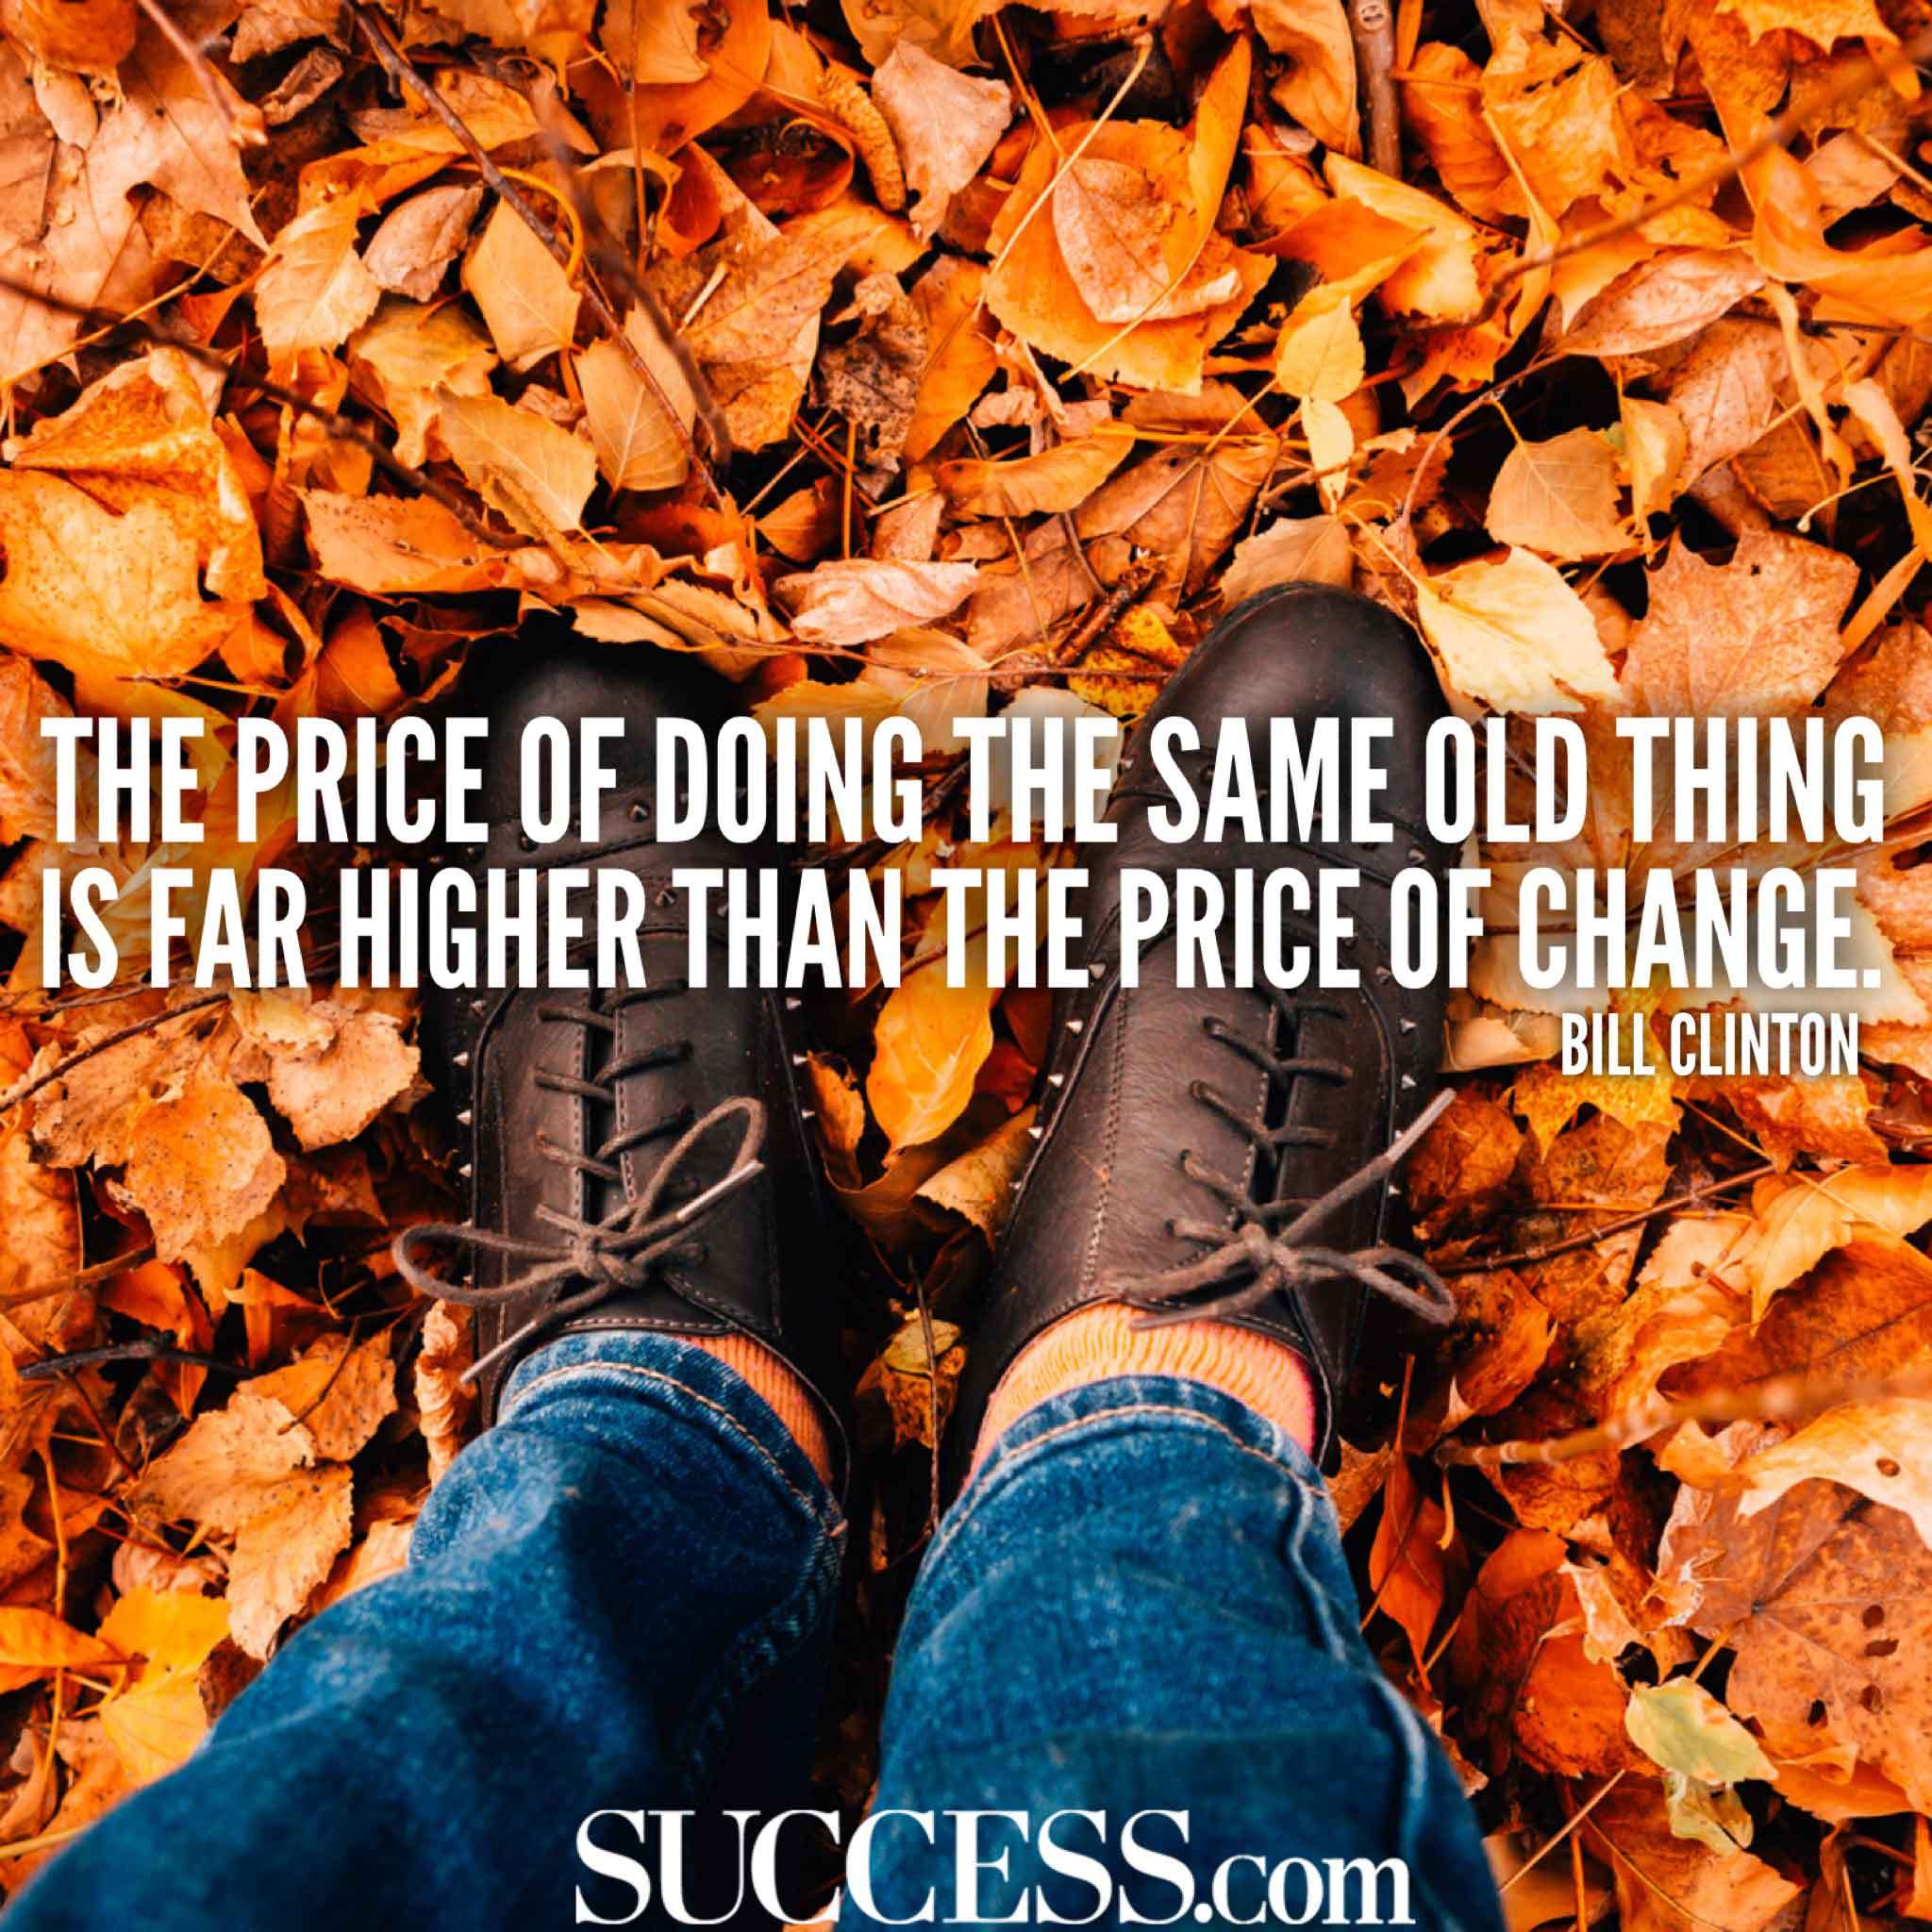 the price of doing the same old thing is far higher than the price of change. bill clinton